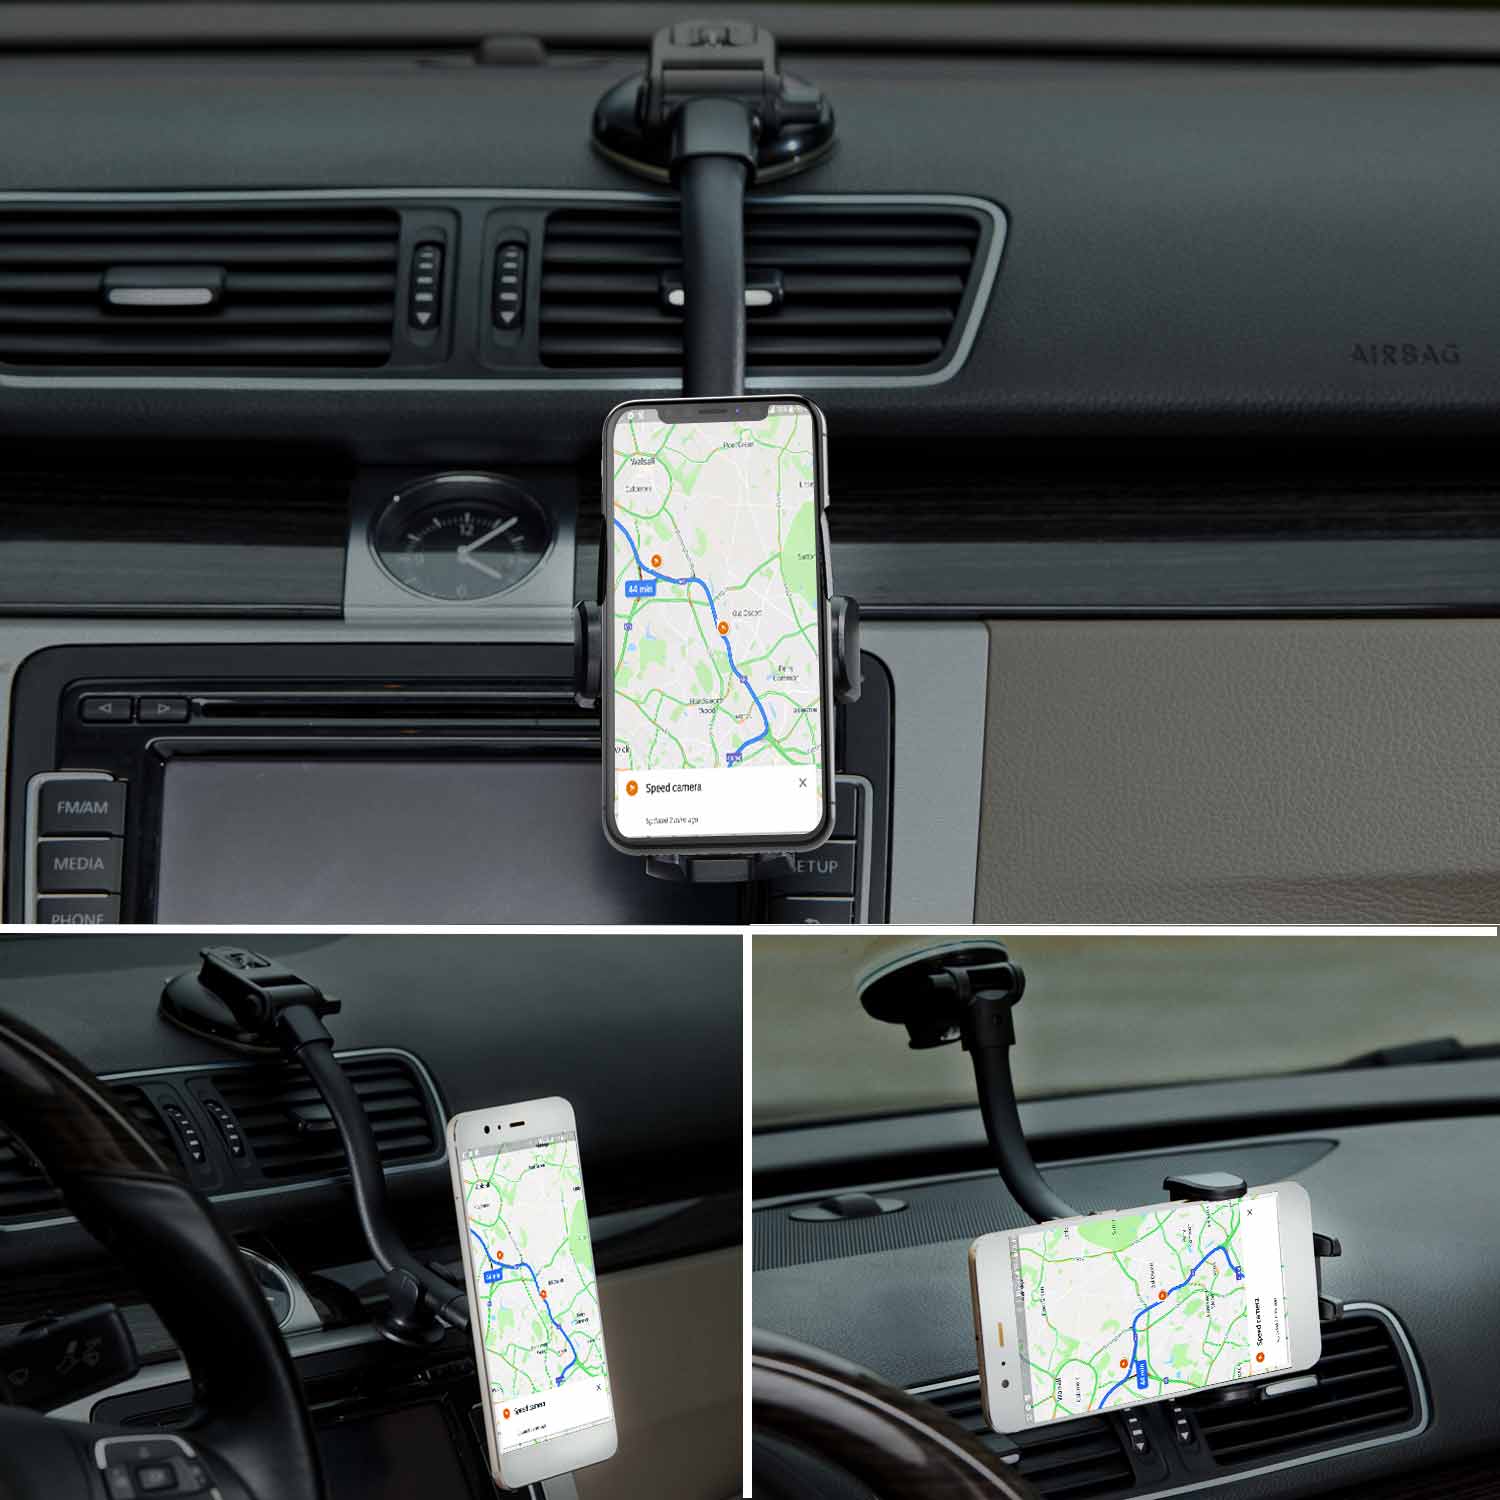 Anti-shake Dashboard Windshield Car Phone Mount Long Arm Phone Holder For  Truck – APPS2Car Mount